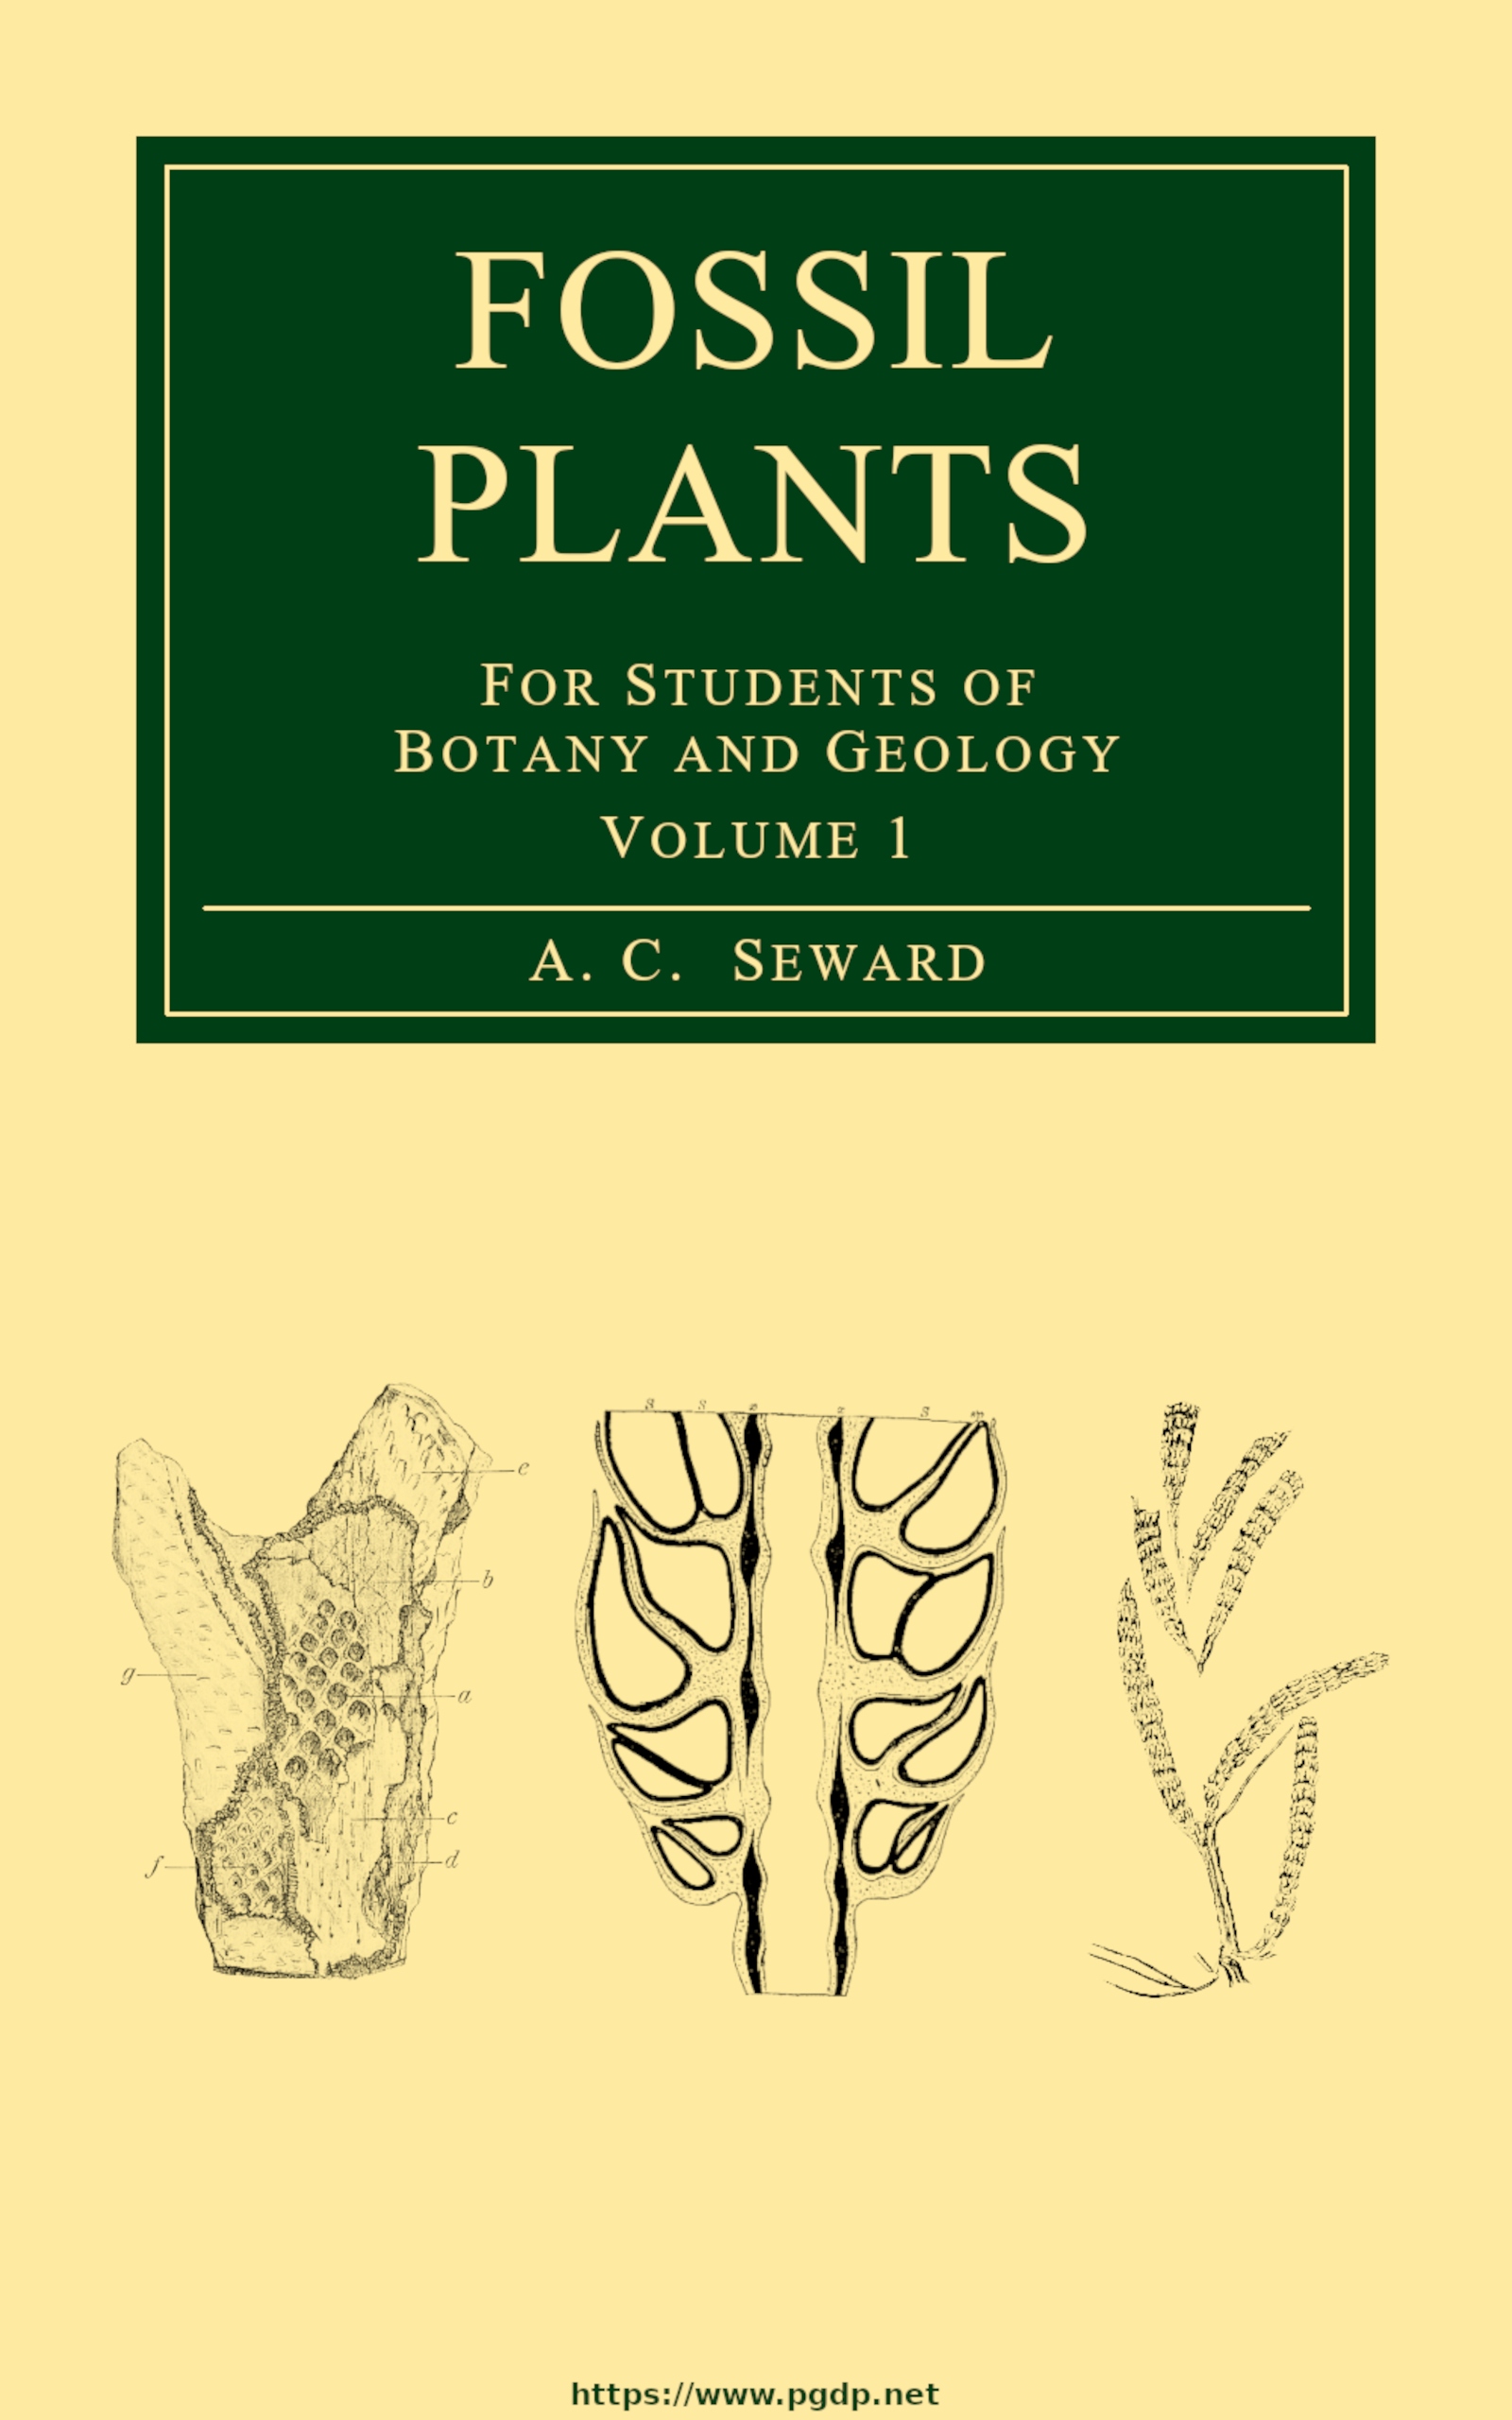 Fossil Plants, Volume 1, by A